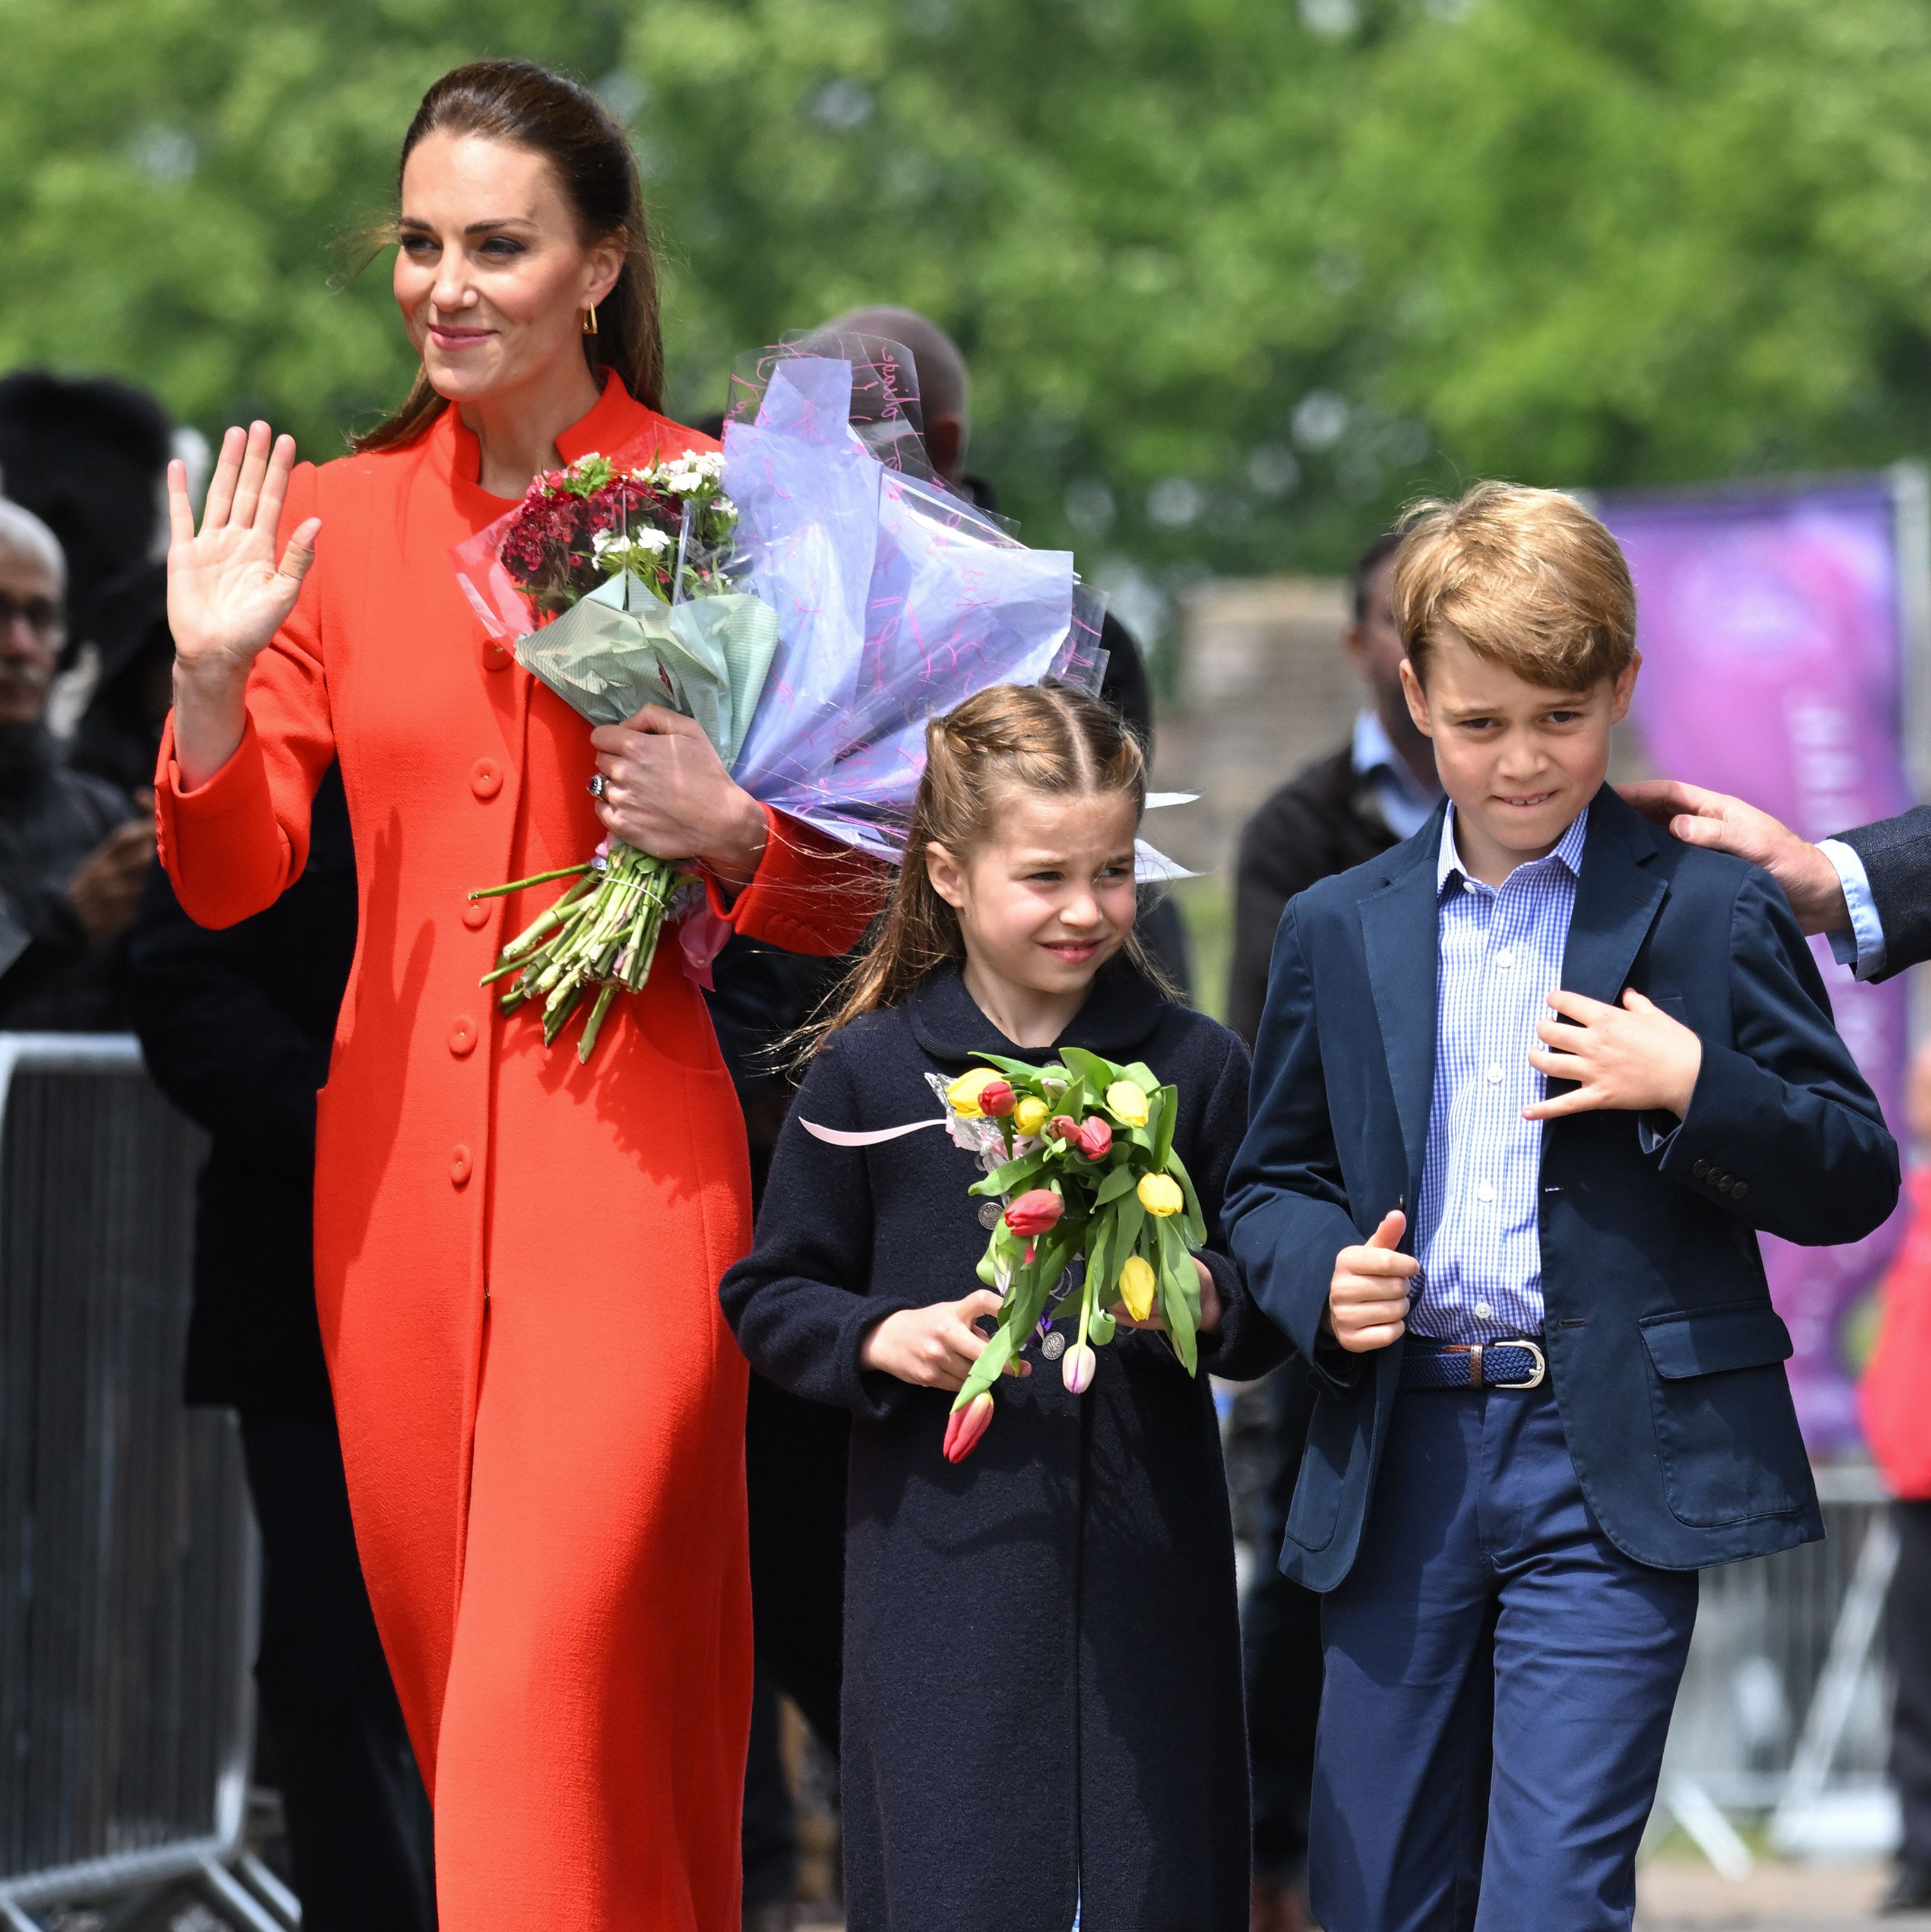 What Kate Middleton Is Like During Her Off-Duty Visits to a London Trampoline Park With Her Kids